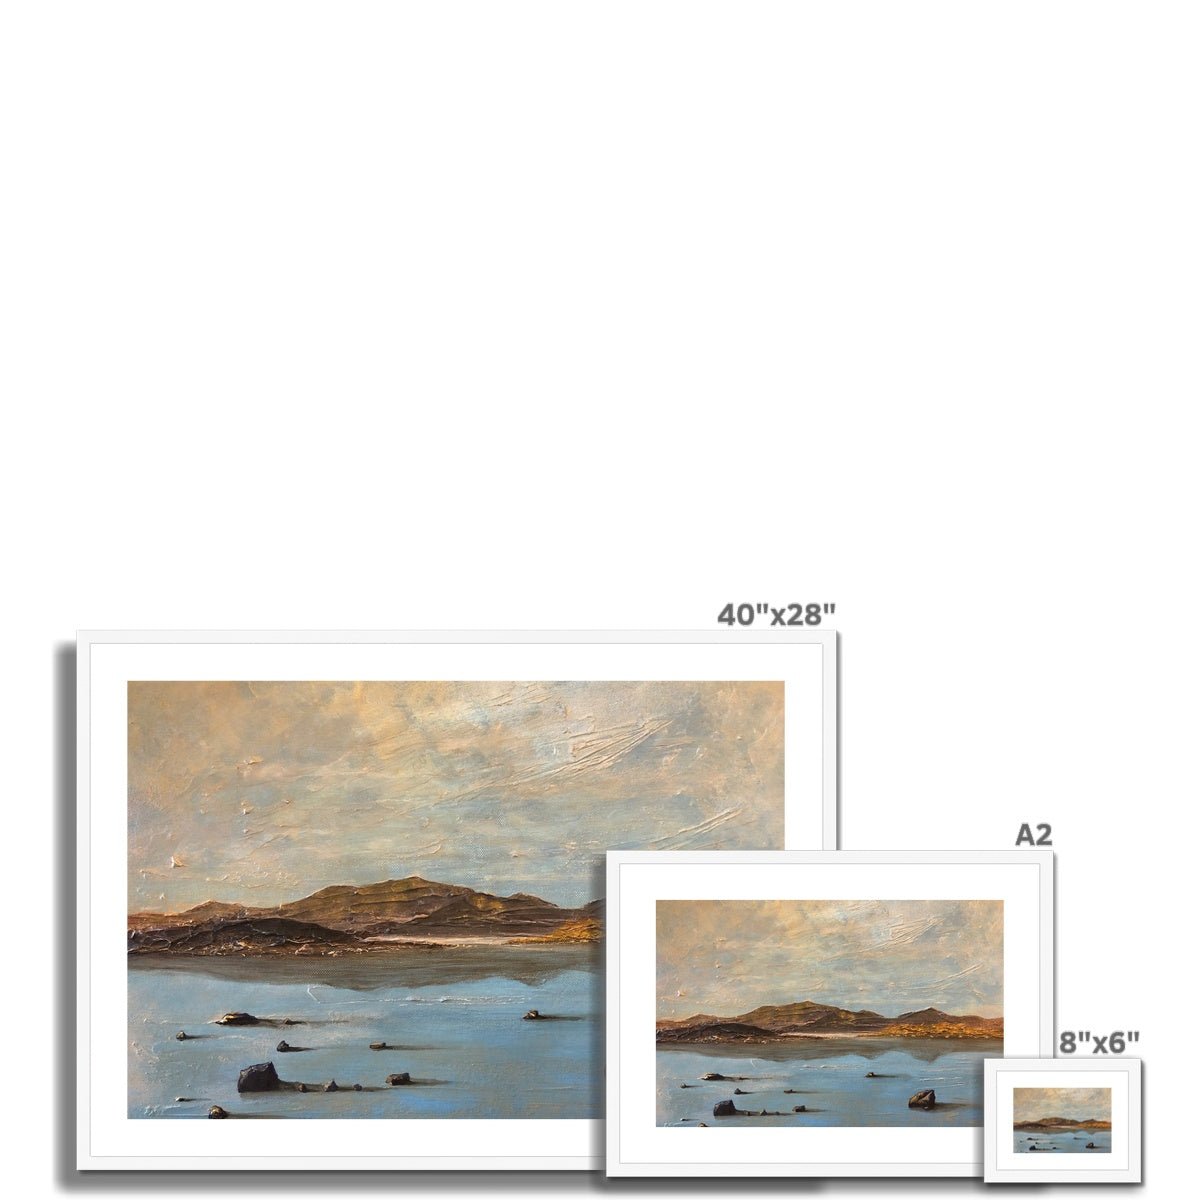 Loch Druidibeg South Uist Painting | Framed & Mounted Prints From Scotland-Framed & Mounted Prints-Scottish Lochs Art Gallery-Paintings, Prints, Homeware, Art Gifts From Scotland By Scottish Artist Kevin Hunter